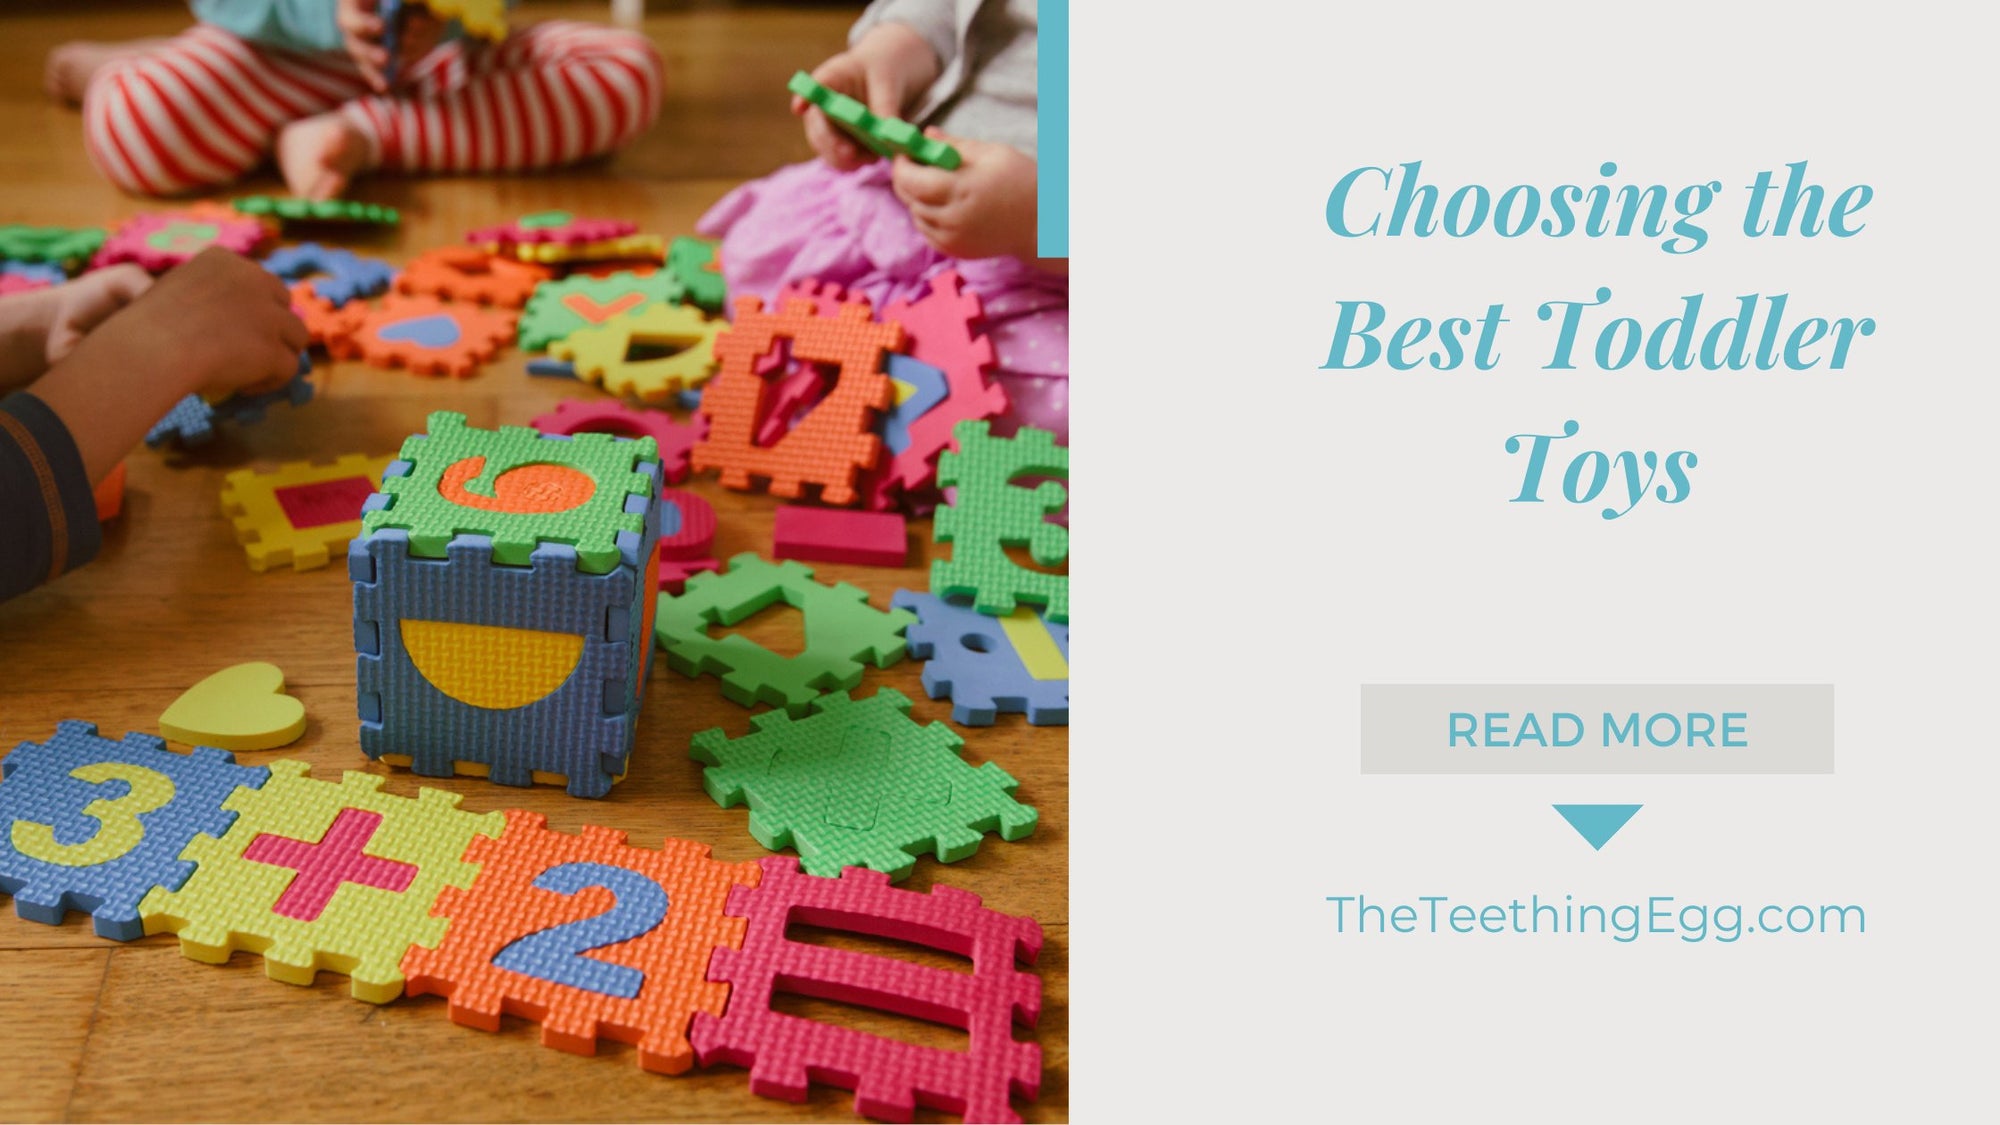 Guide: Choosing the Best Toddler Toys